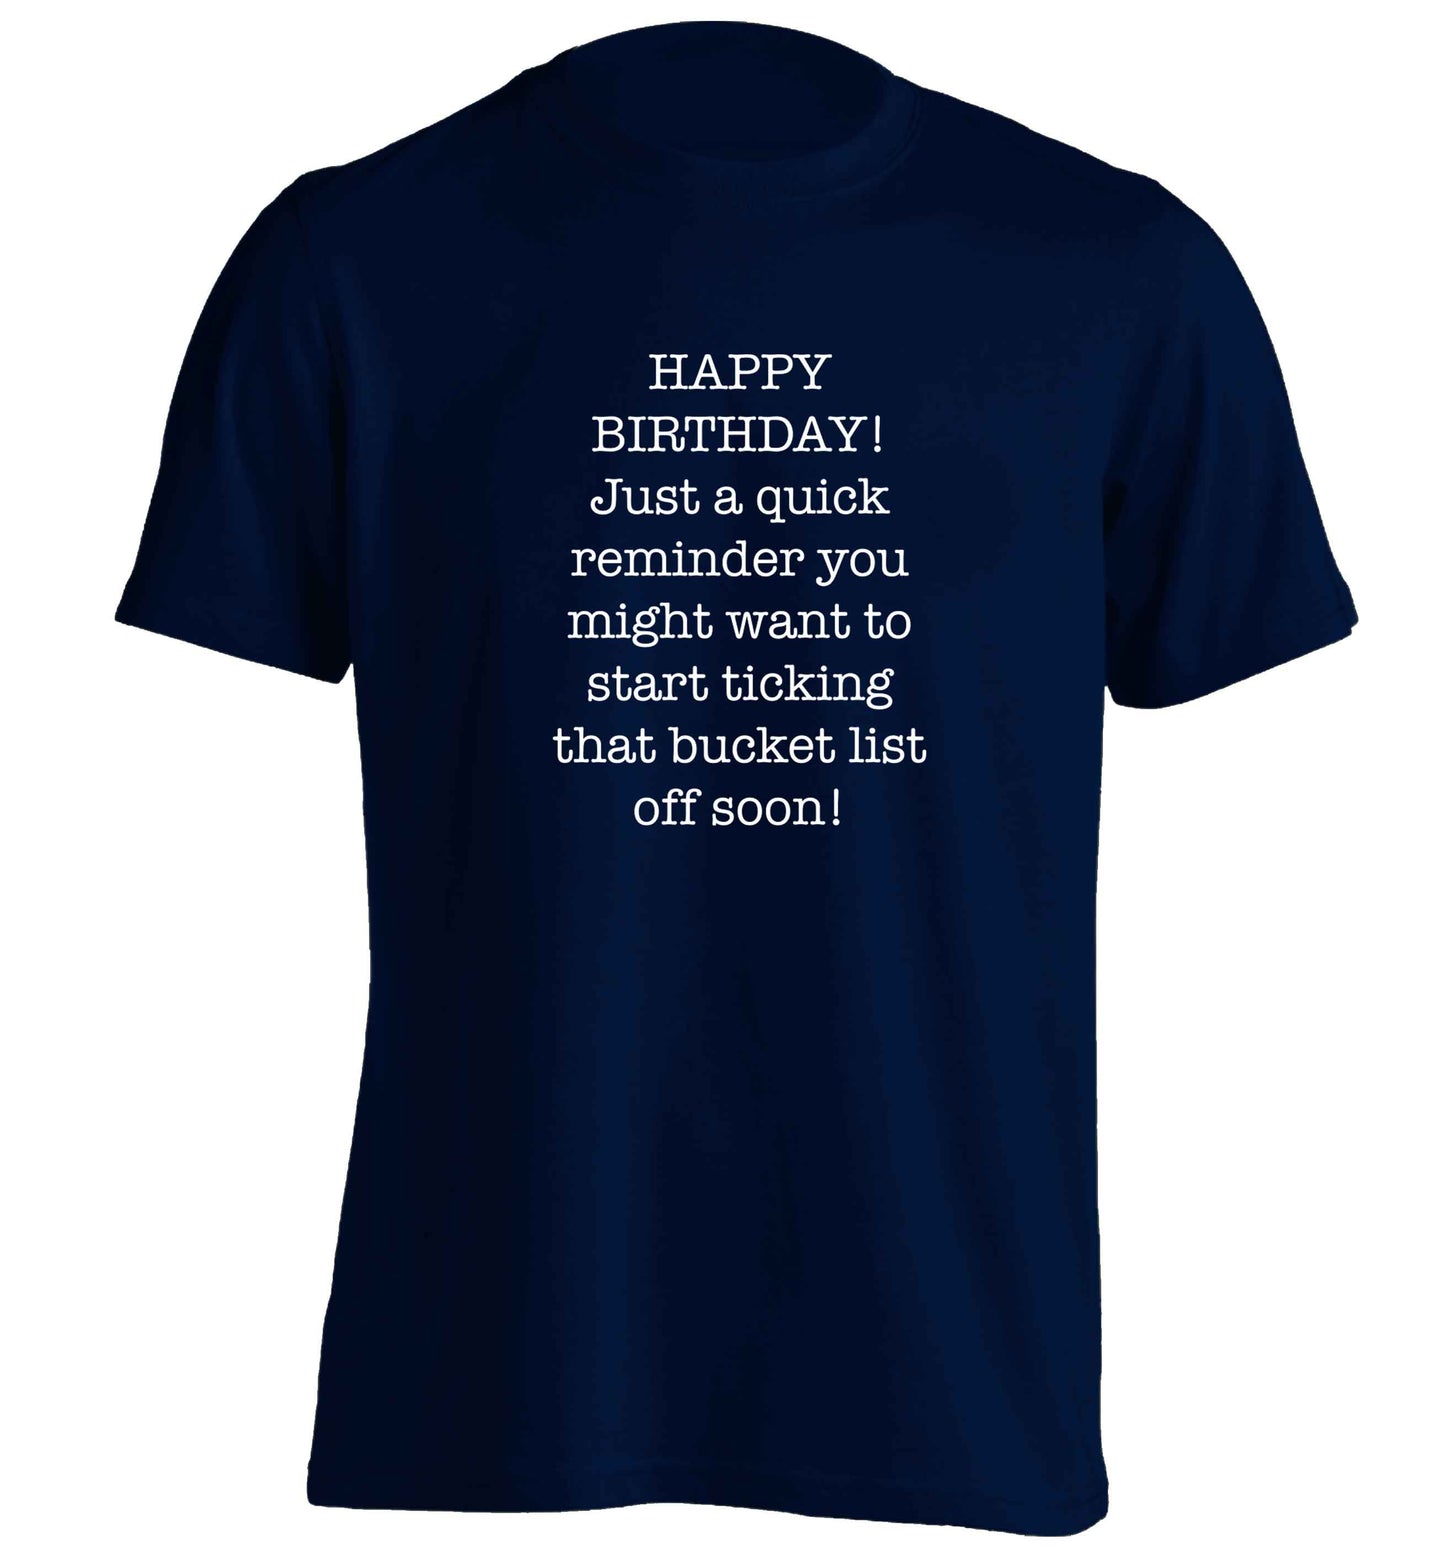 Happy birthday, just a quick reminder you might want to start ticking that bucket list off soon adults unisex navy Tshirt 2XL